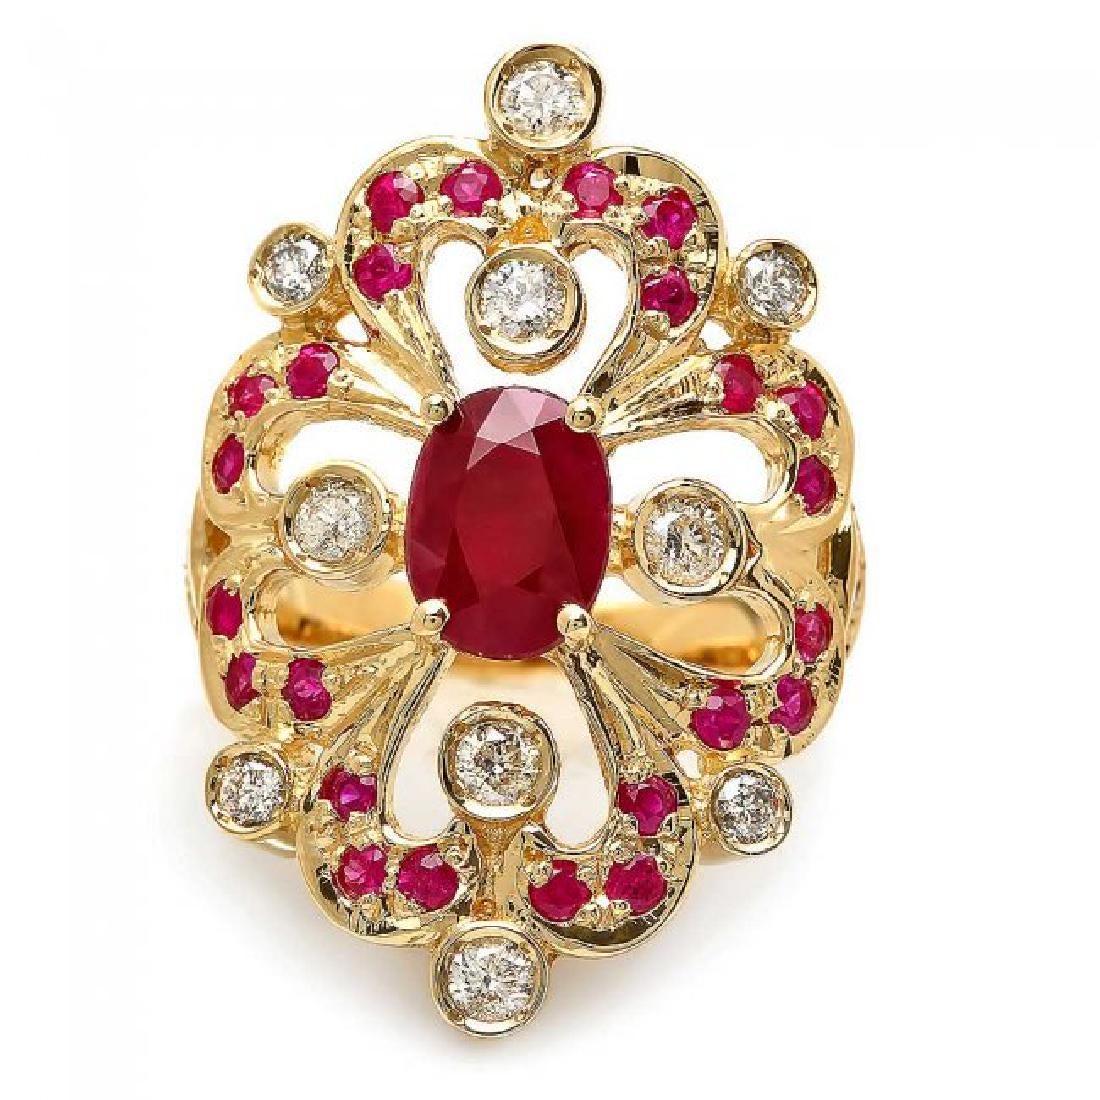 14K Yellow Gold 2.12ct Ruby and 0.48ct Diamond Ring